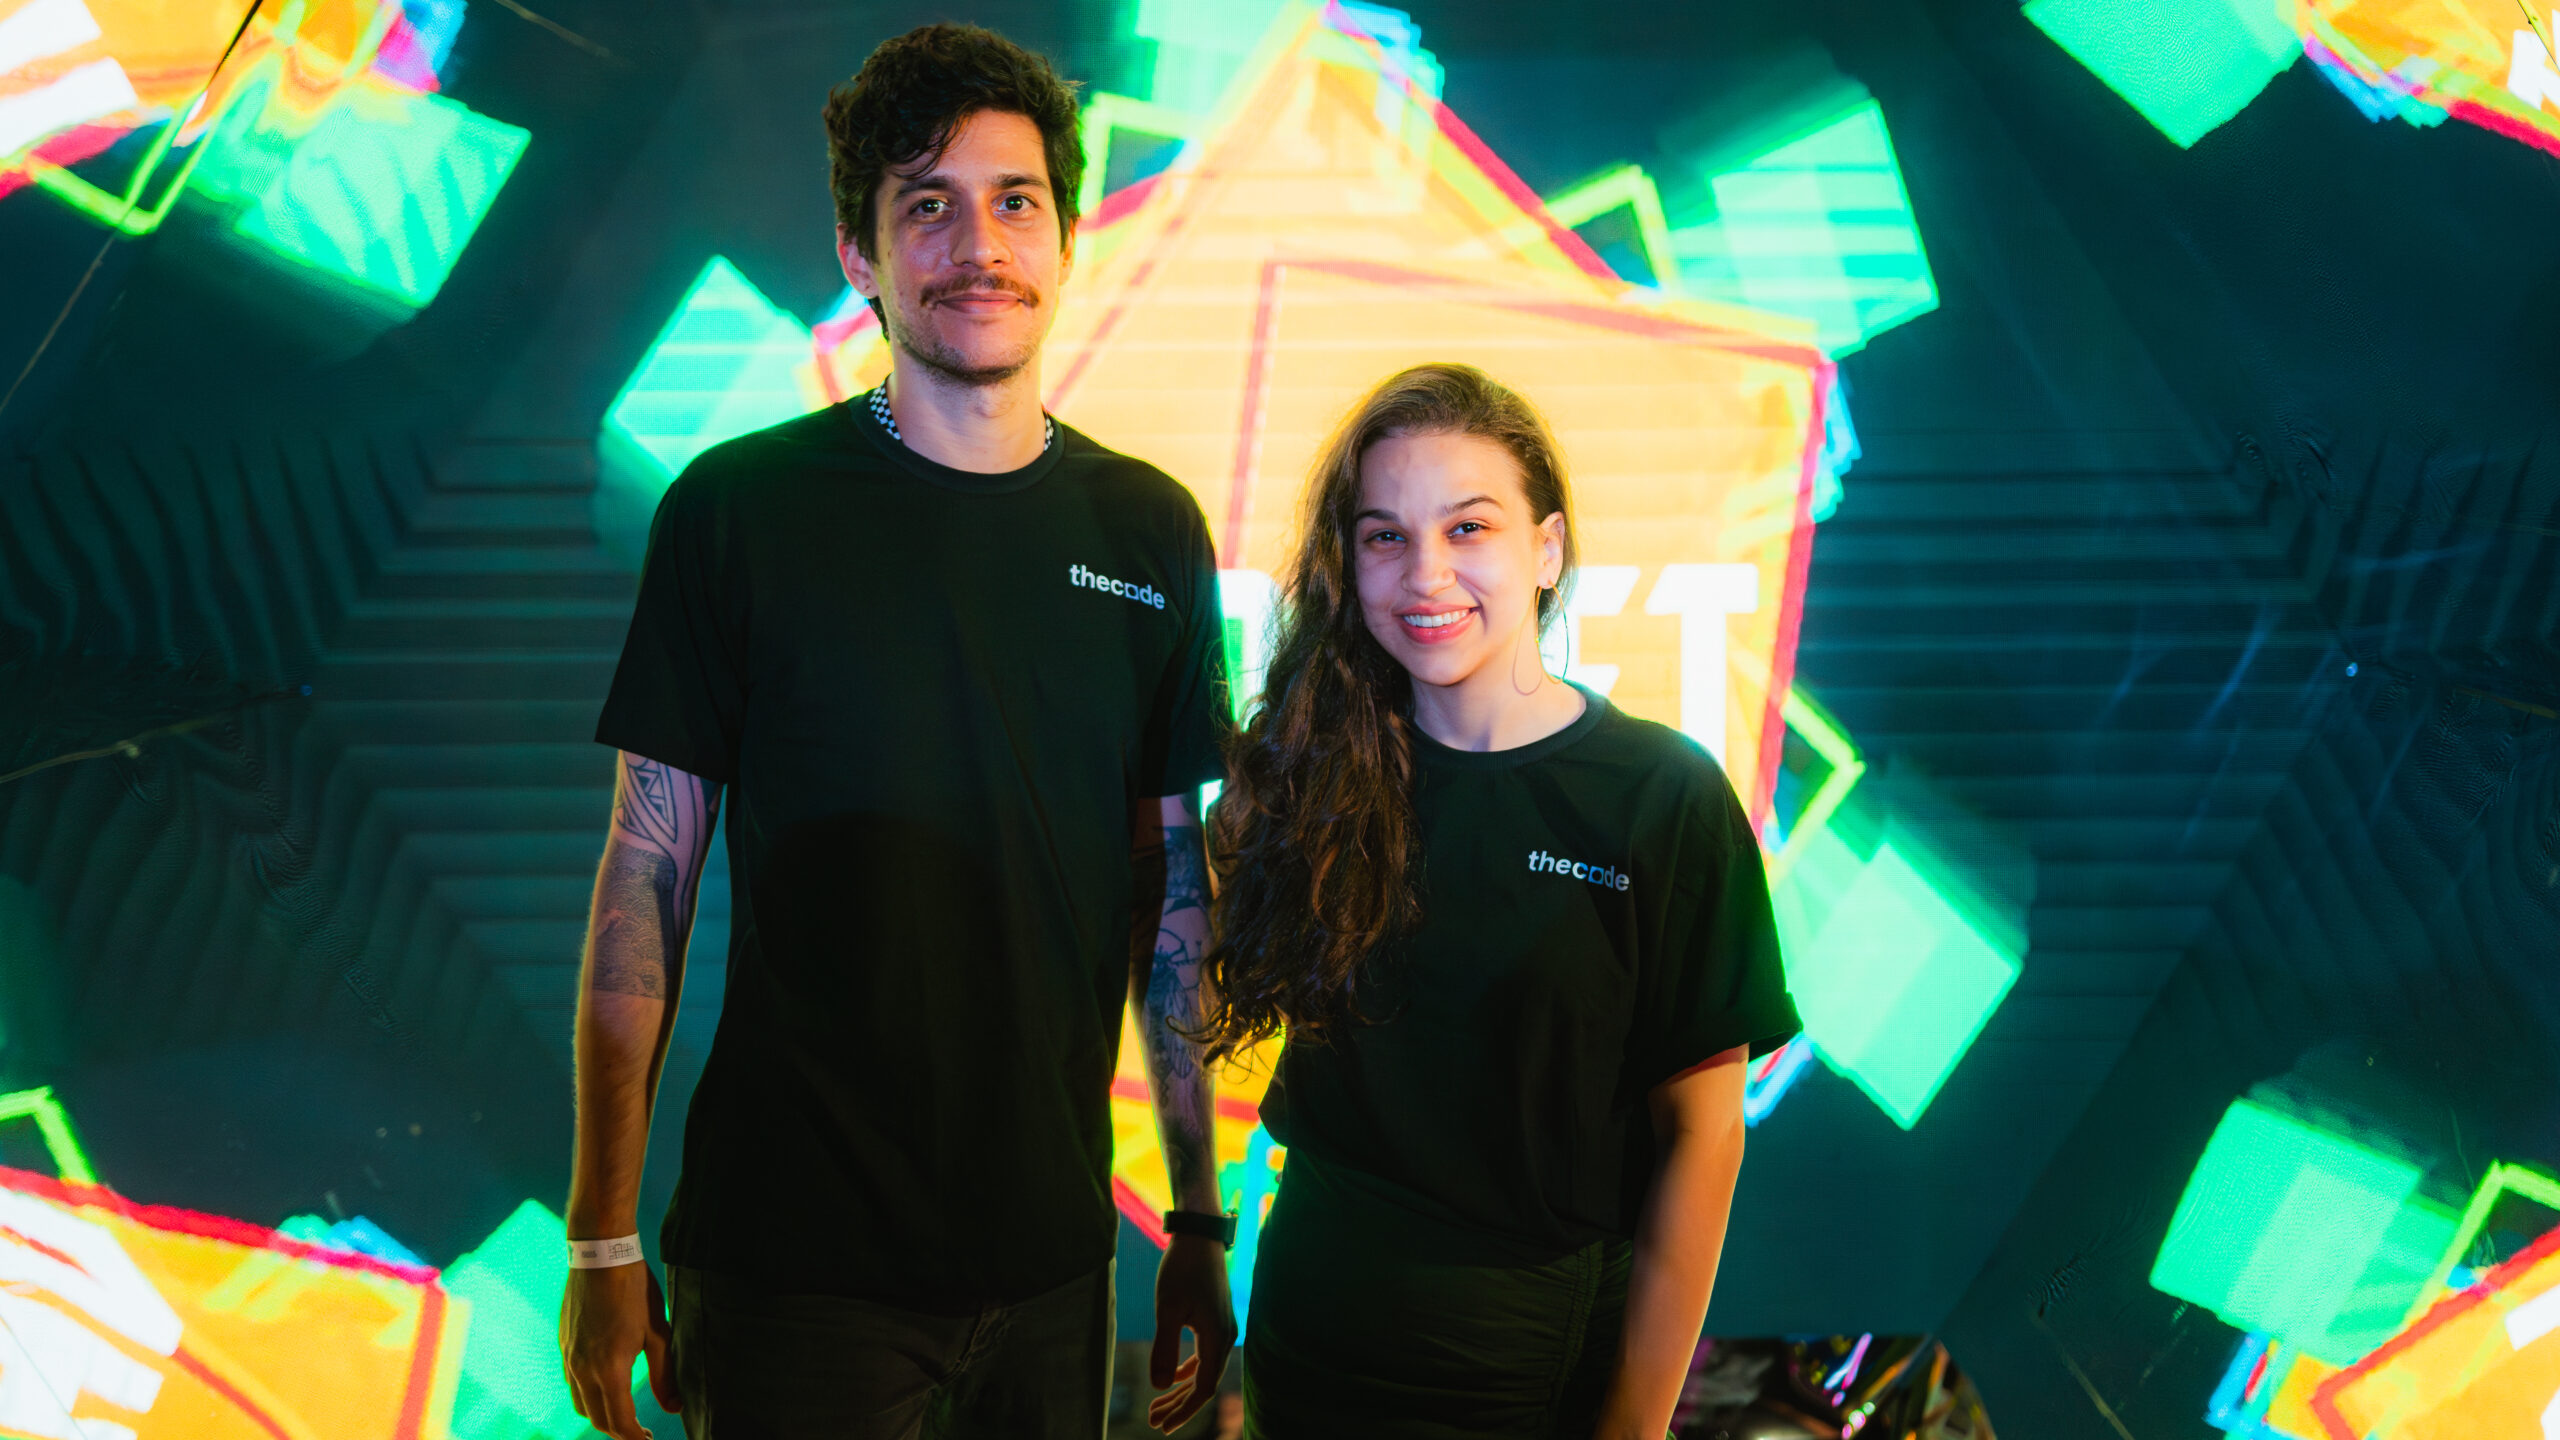 Photo of Francisco Barretto and Micaelle Lages Lucena standing together and smiling at the camera. Behind them is a big projection screen with visuals of glowing geometric shapes on a greenish background. 